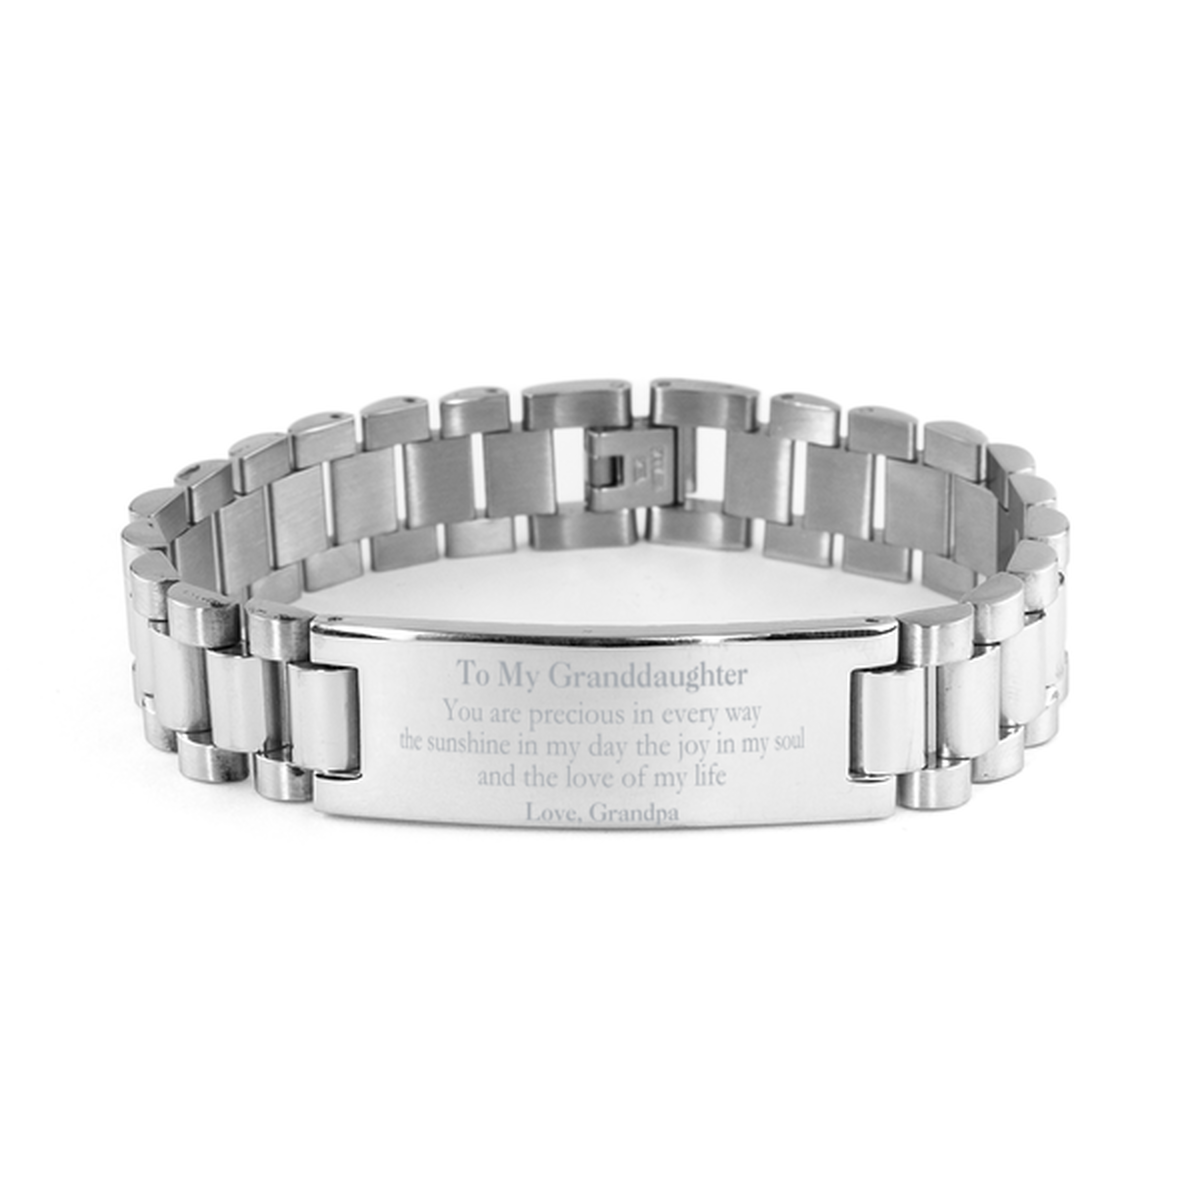 Graduation Gifts for Granddaughter Ladder Stainless Steel Bracelet Present from Grandpa, Christmas Granddaughter Birthday Gifts Granddaughter You are precious in every way the sunshine in my day. Love, Grandpa